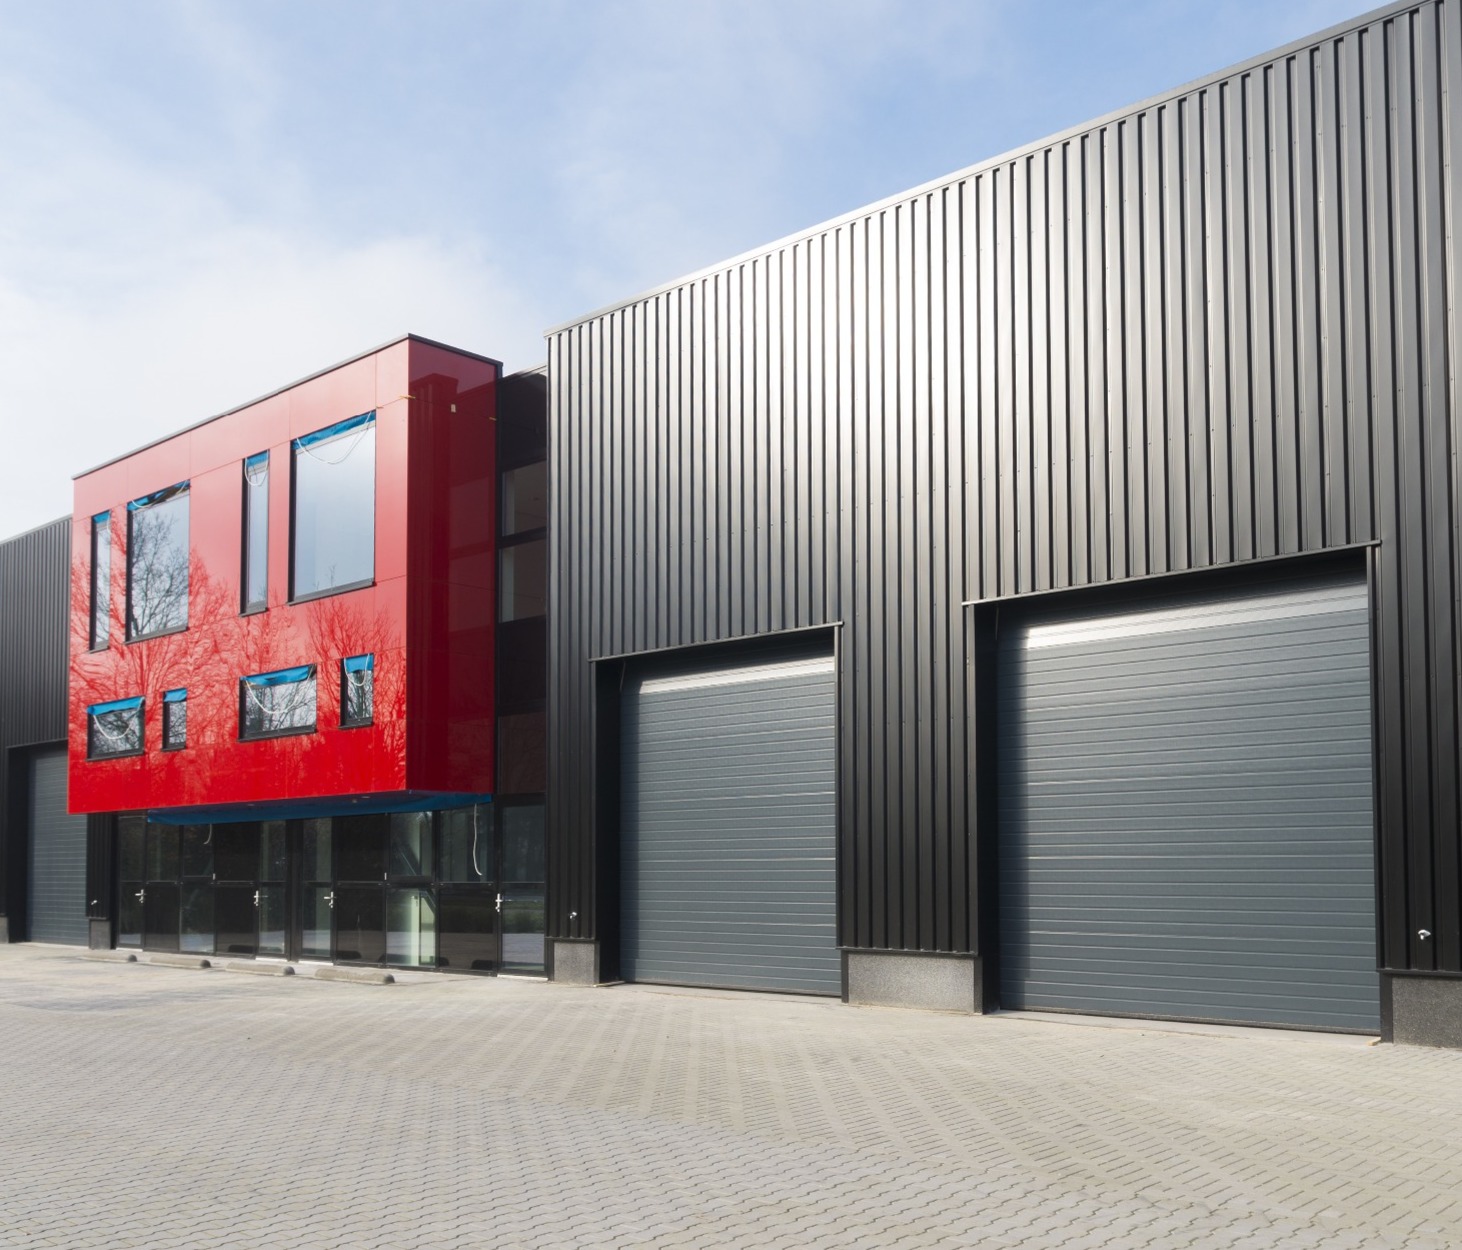 A commercial building, with red frontage; our commercial conveyancing solicitors can help with your commercial property sale.